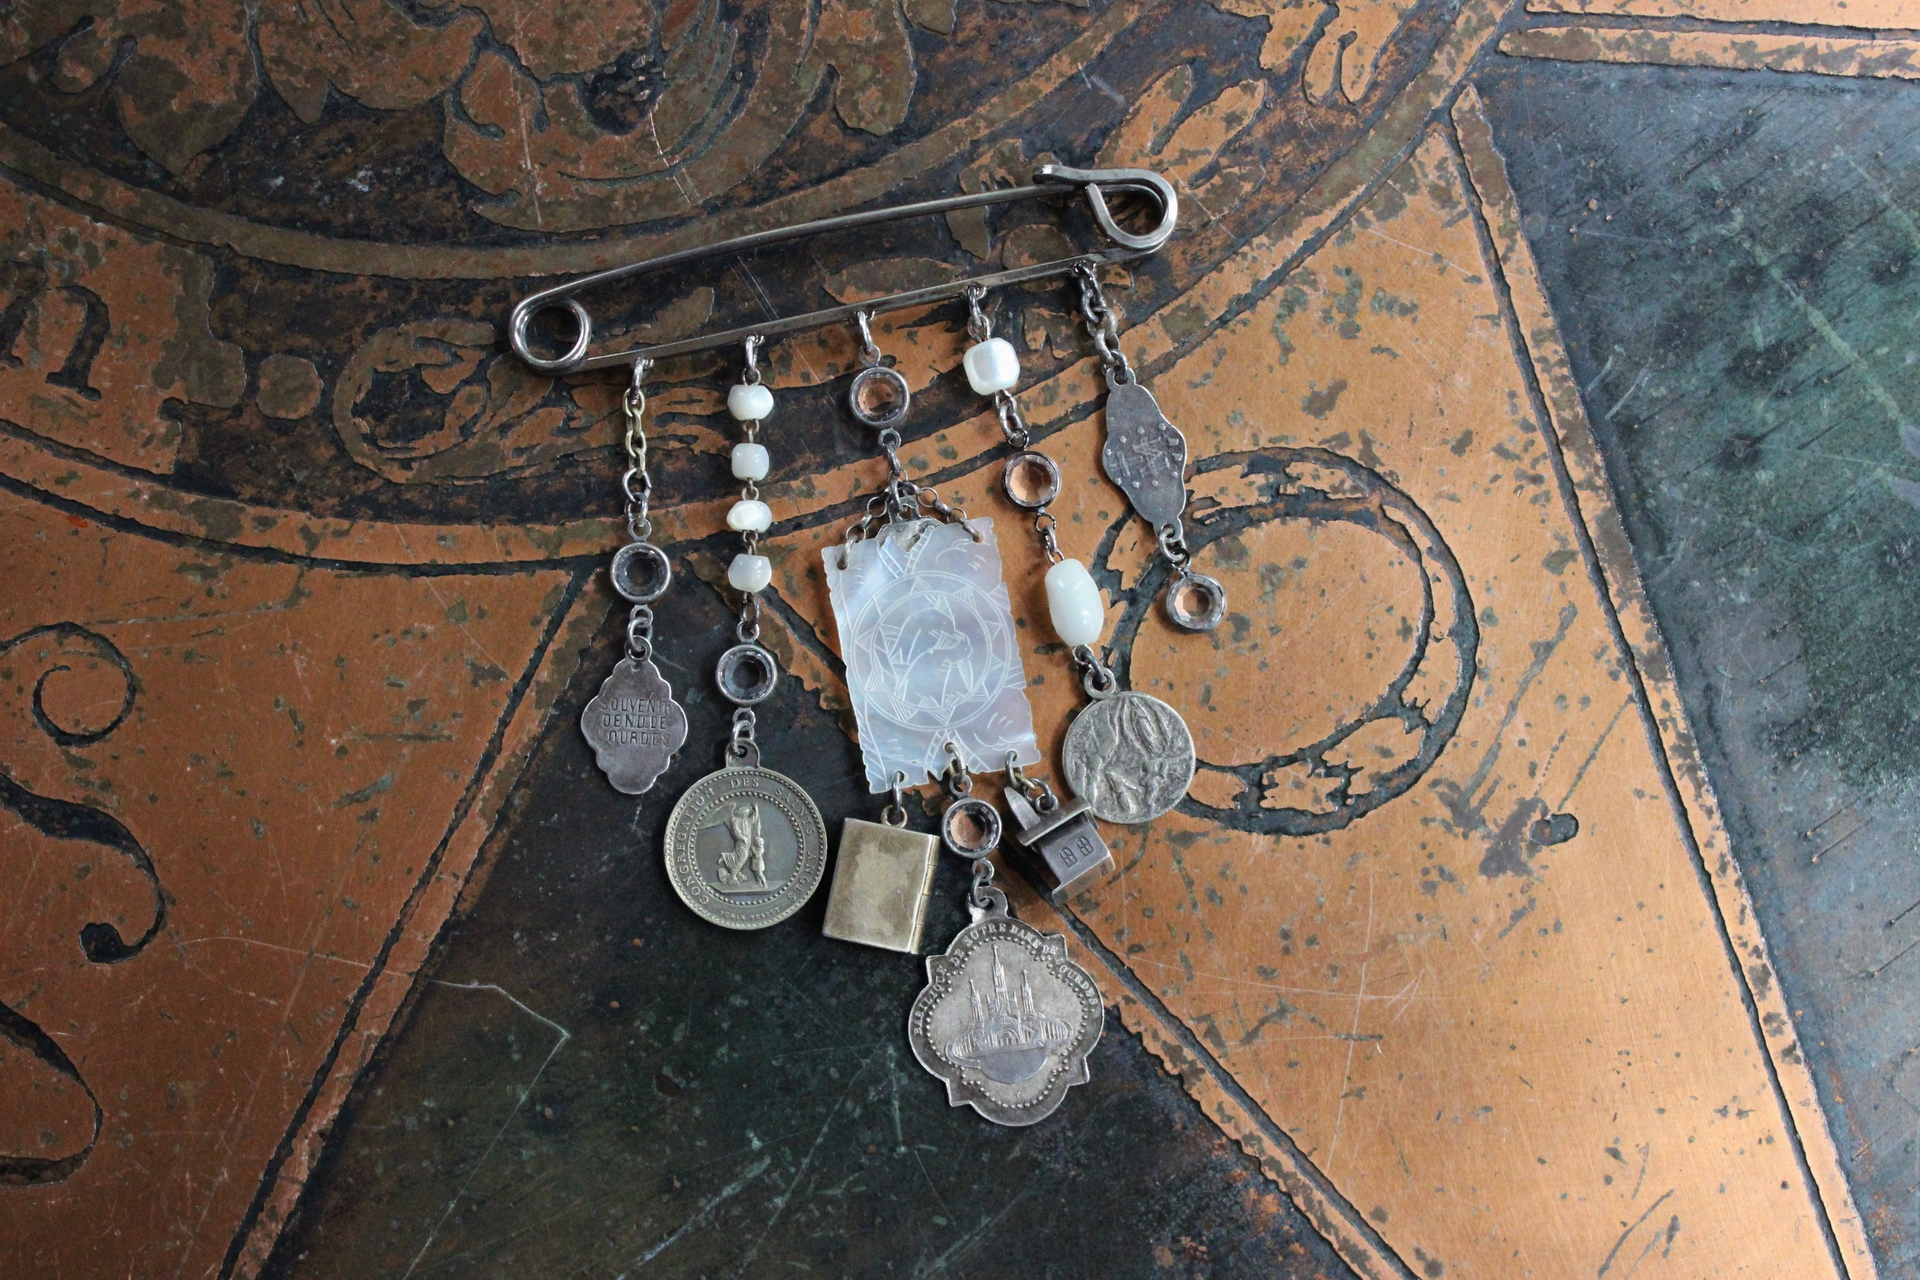 Jacket/Shawl Pin Closure w/Rare Antique Penin Poncet Archangel Michael Medal,Rare Antique Sterling Stanhope Chapel,Antique Engraved Mother of Pearl Finding & More!